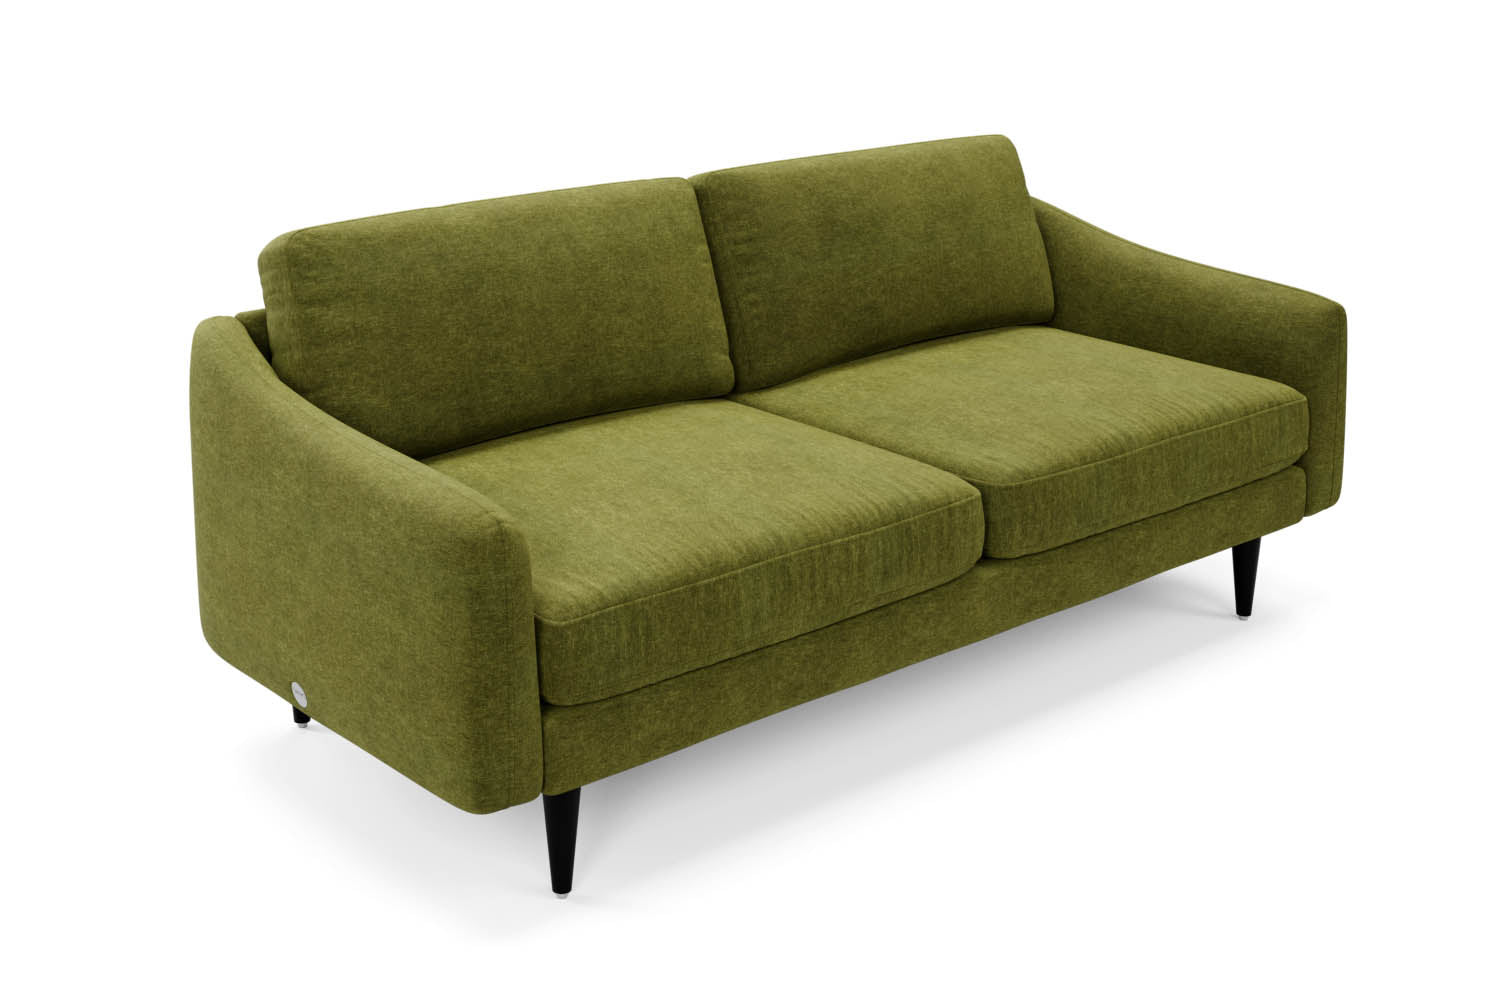 The Rebel 3 Seater Sofa in Moss with black legs